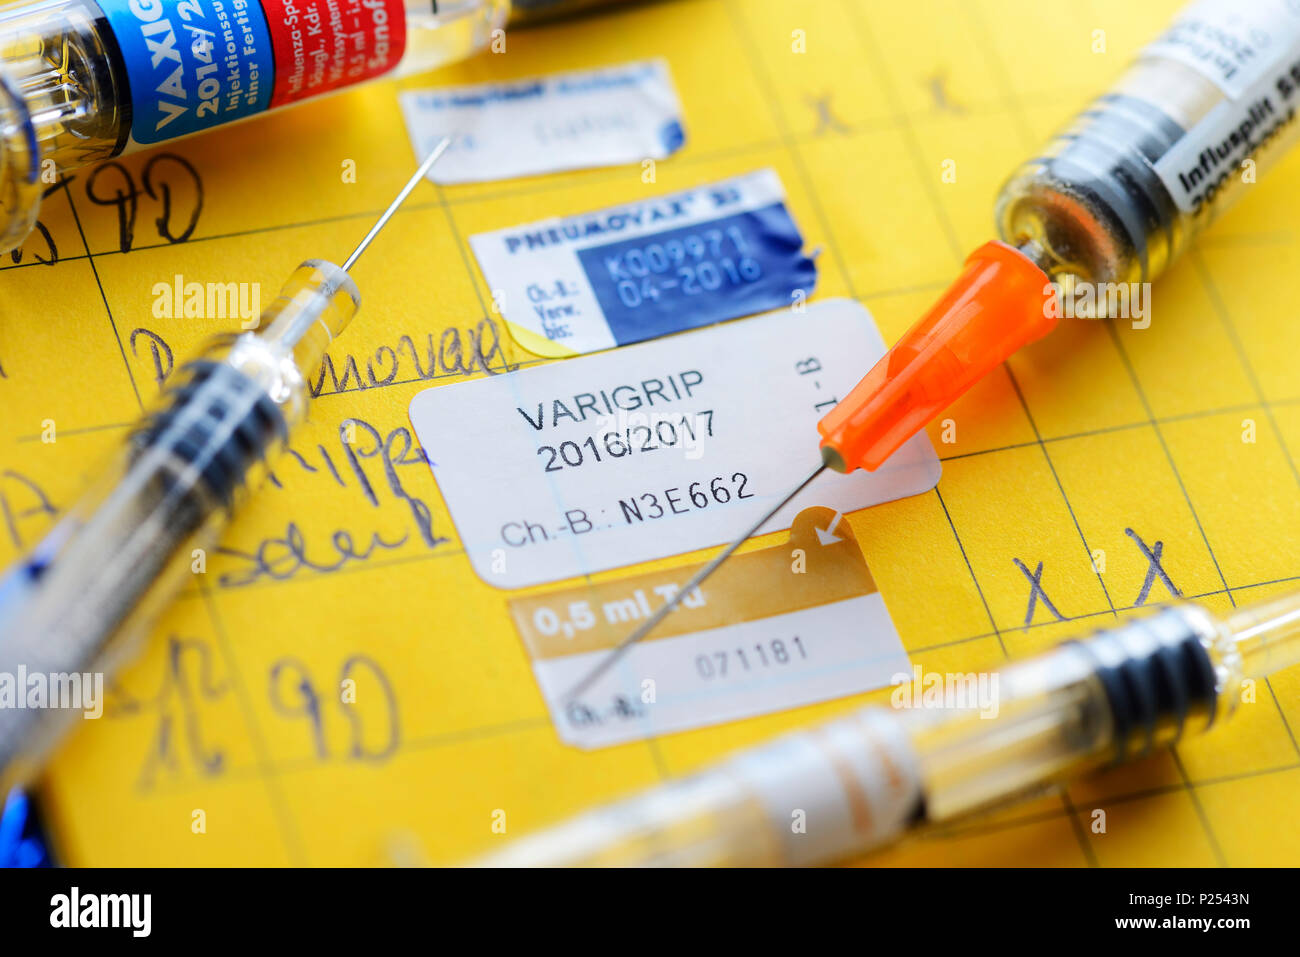 Yellow Card, syringes, influenza vaccination Stock Photo